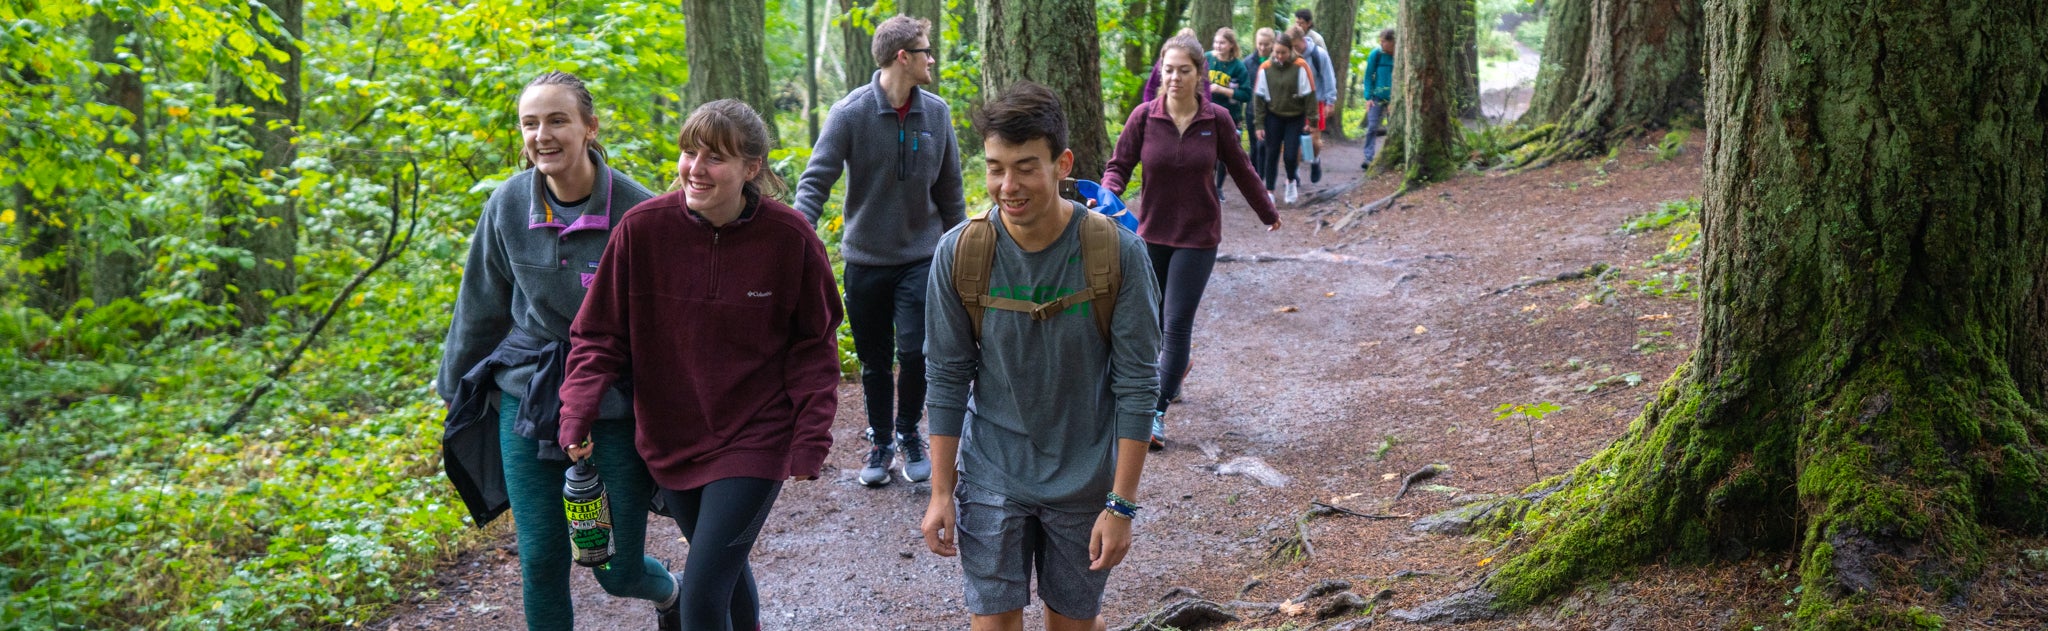 A group hiking through a forest of moss-covered evergreen trees